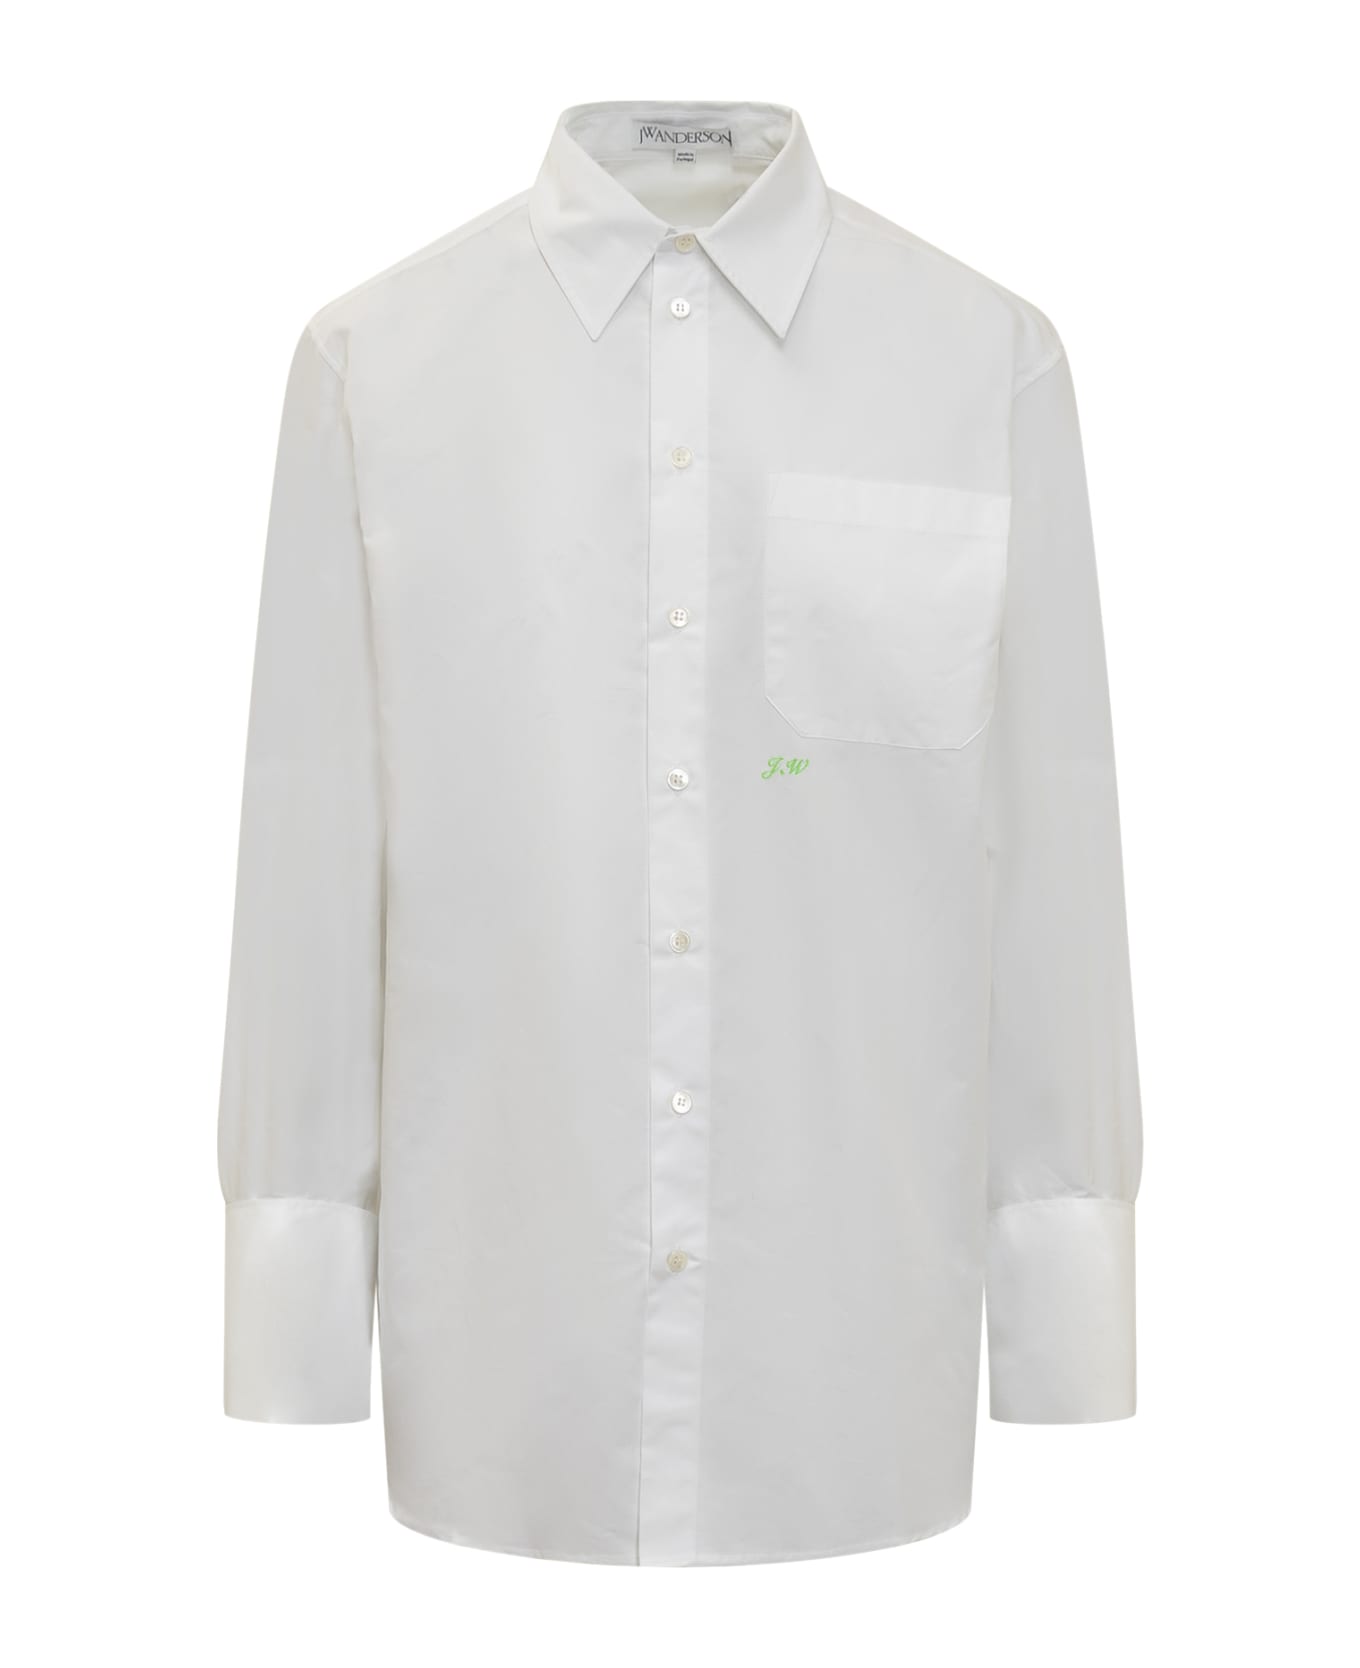 J.W. Anderson Oversize Shirt - White